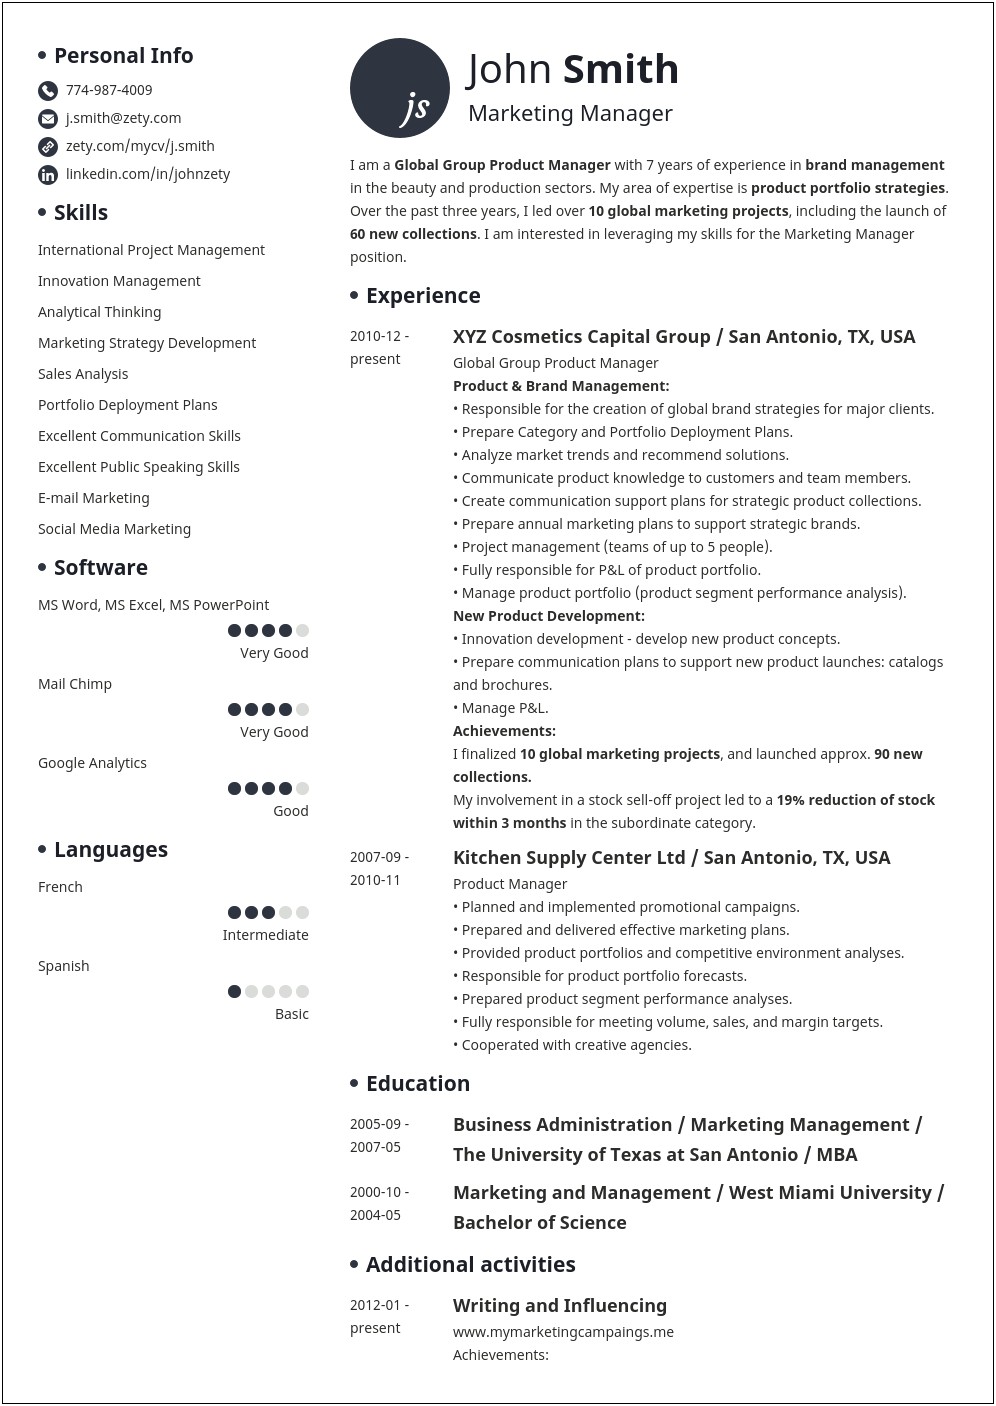 Example Of Education In Resume